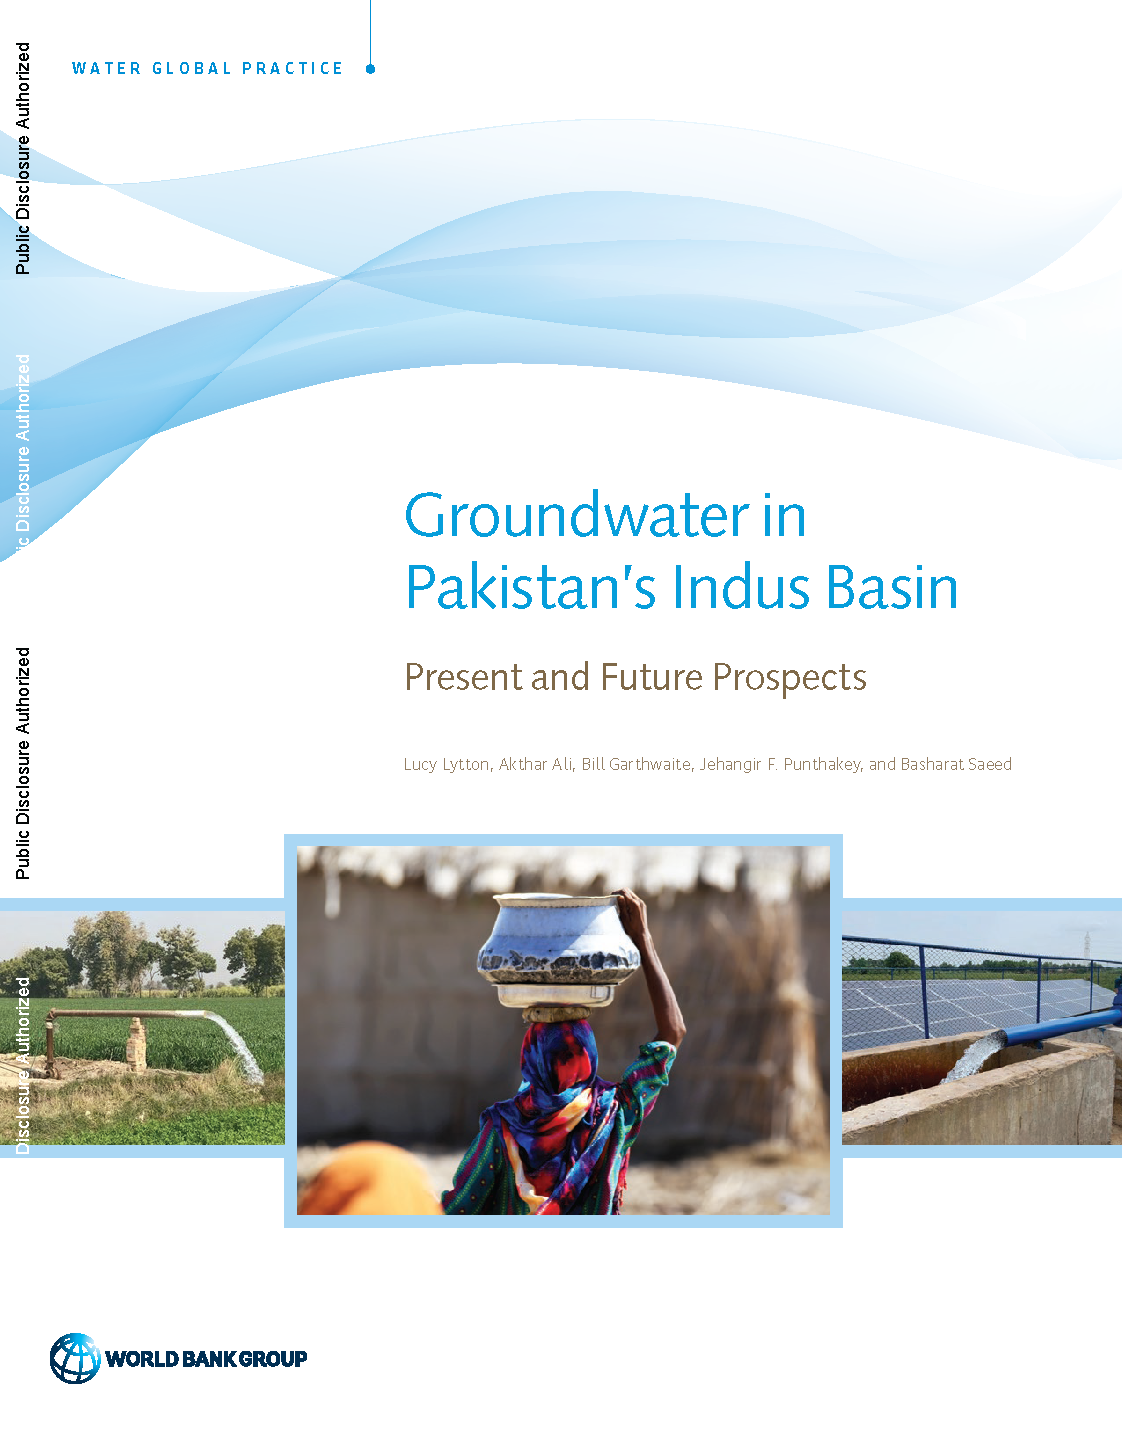 Cover-page for Groundwater in Pakistan's Indus Basin report